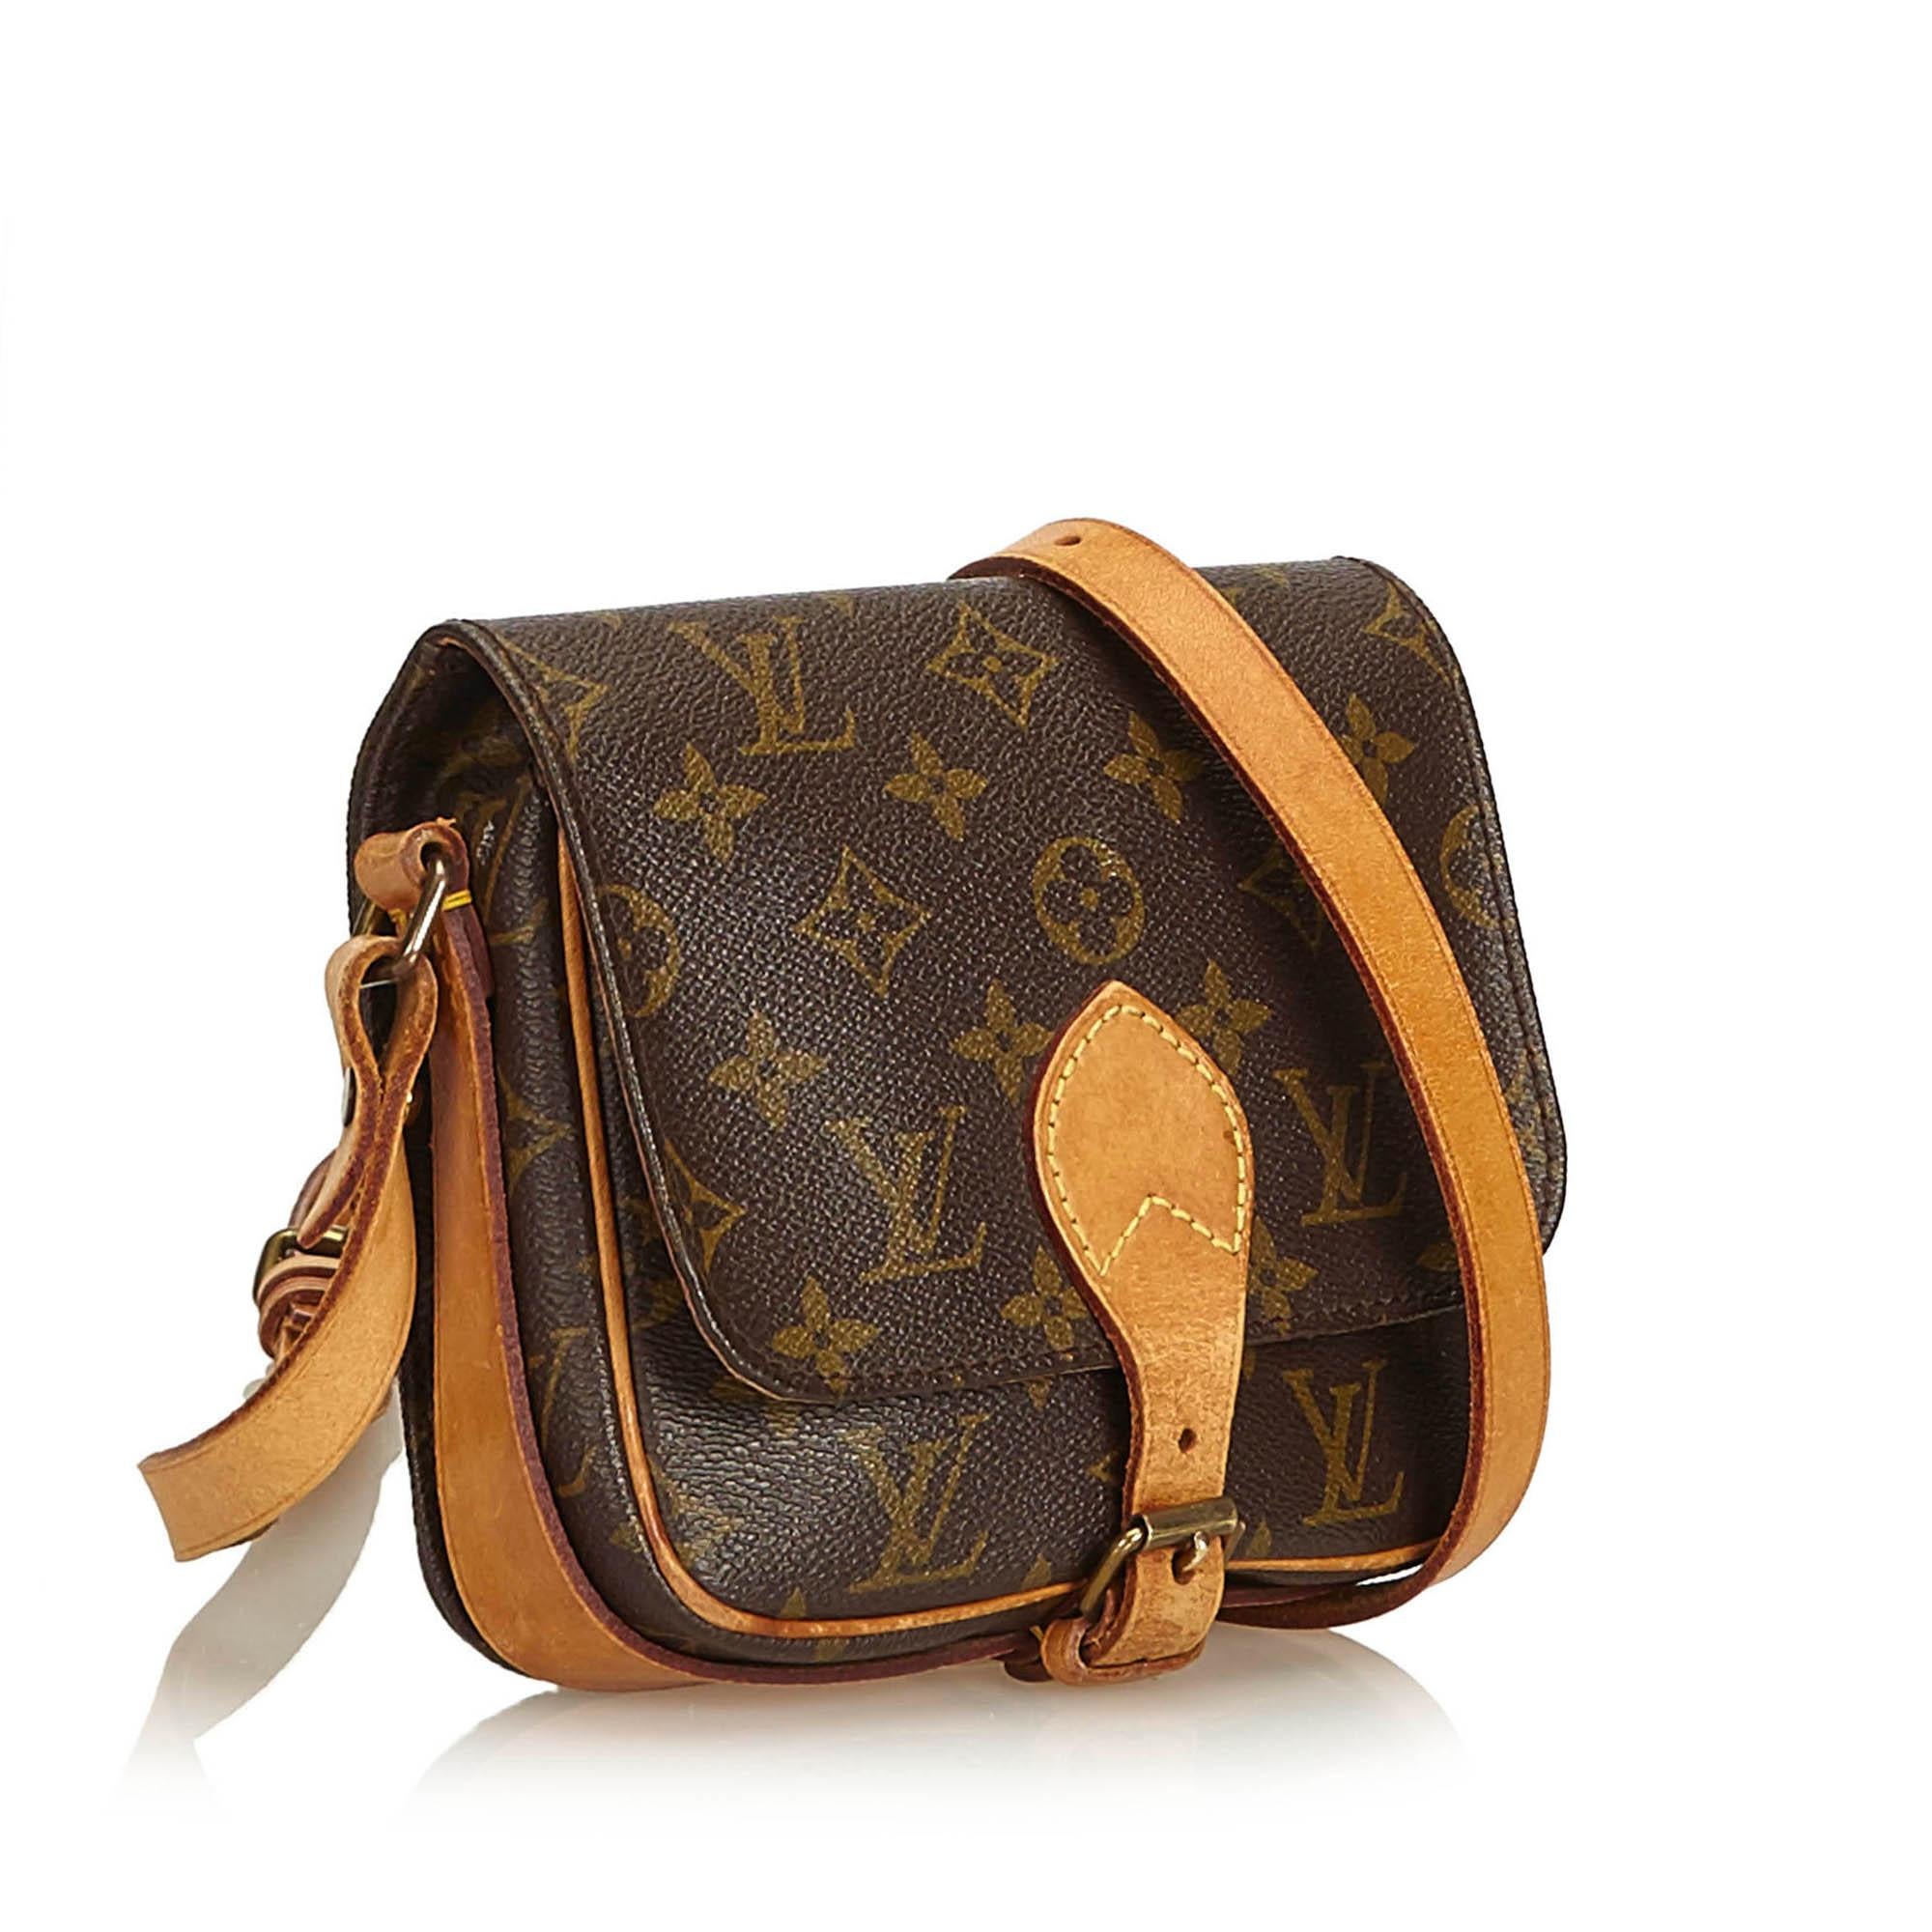 The Cartouchiere PM features the Monogram canvas, a front flap closure secured by a belt, an adjustable flat vachetta strap, vachetta piping and trim, and leather lining. It carries as B condition rating.

Inclusions: 
This item does not come with